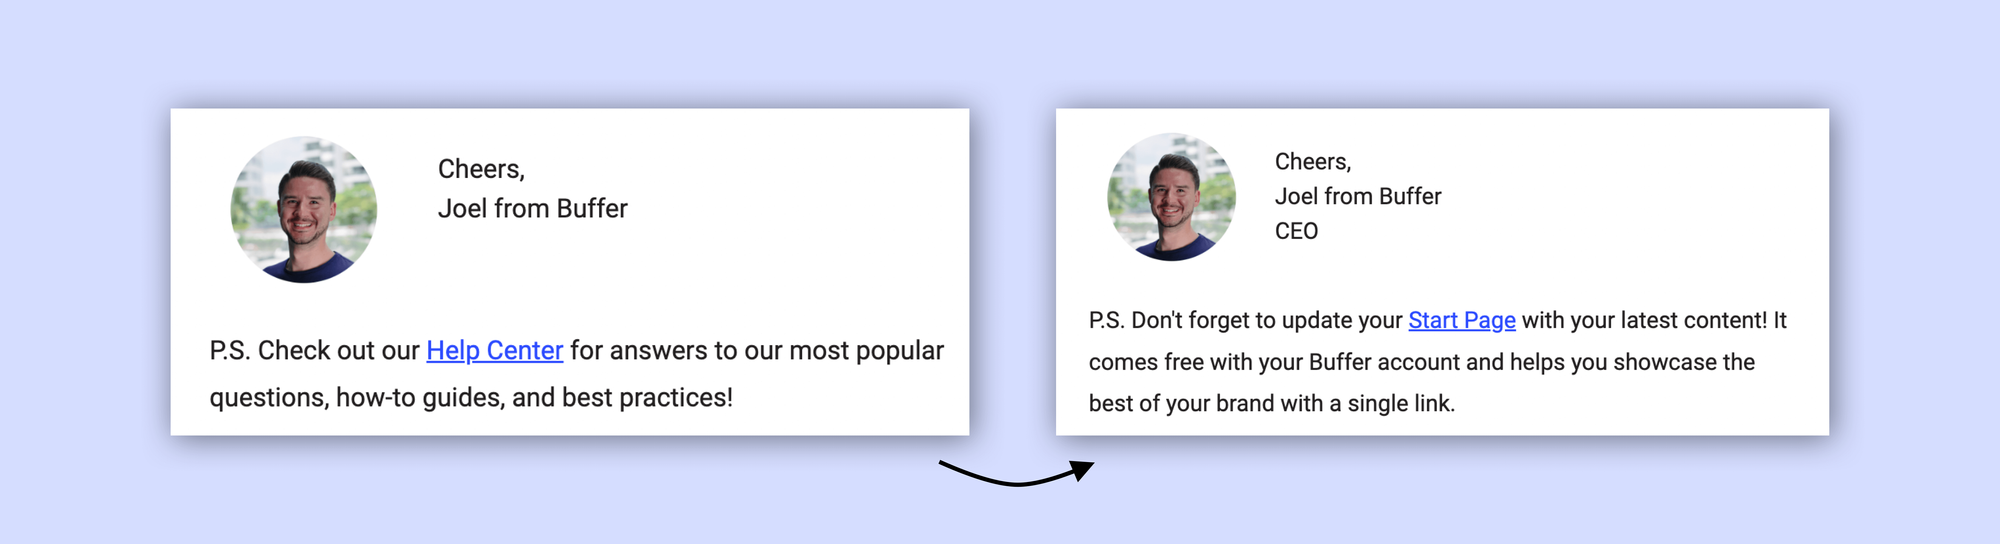 Adding a Start Page growth loop on Buffer's onboarding emails.